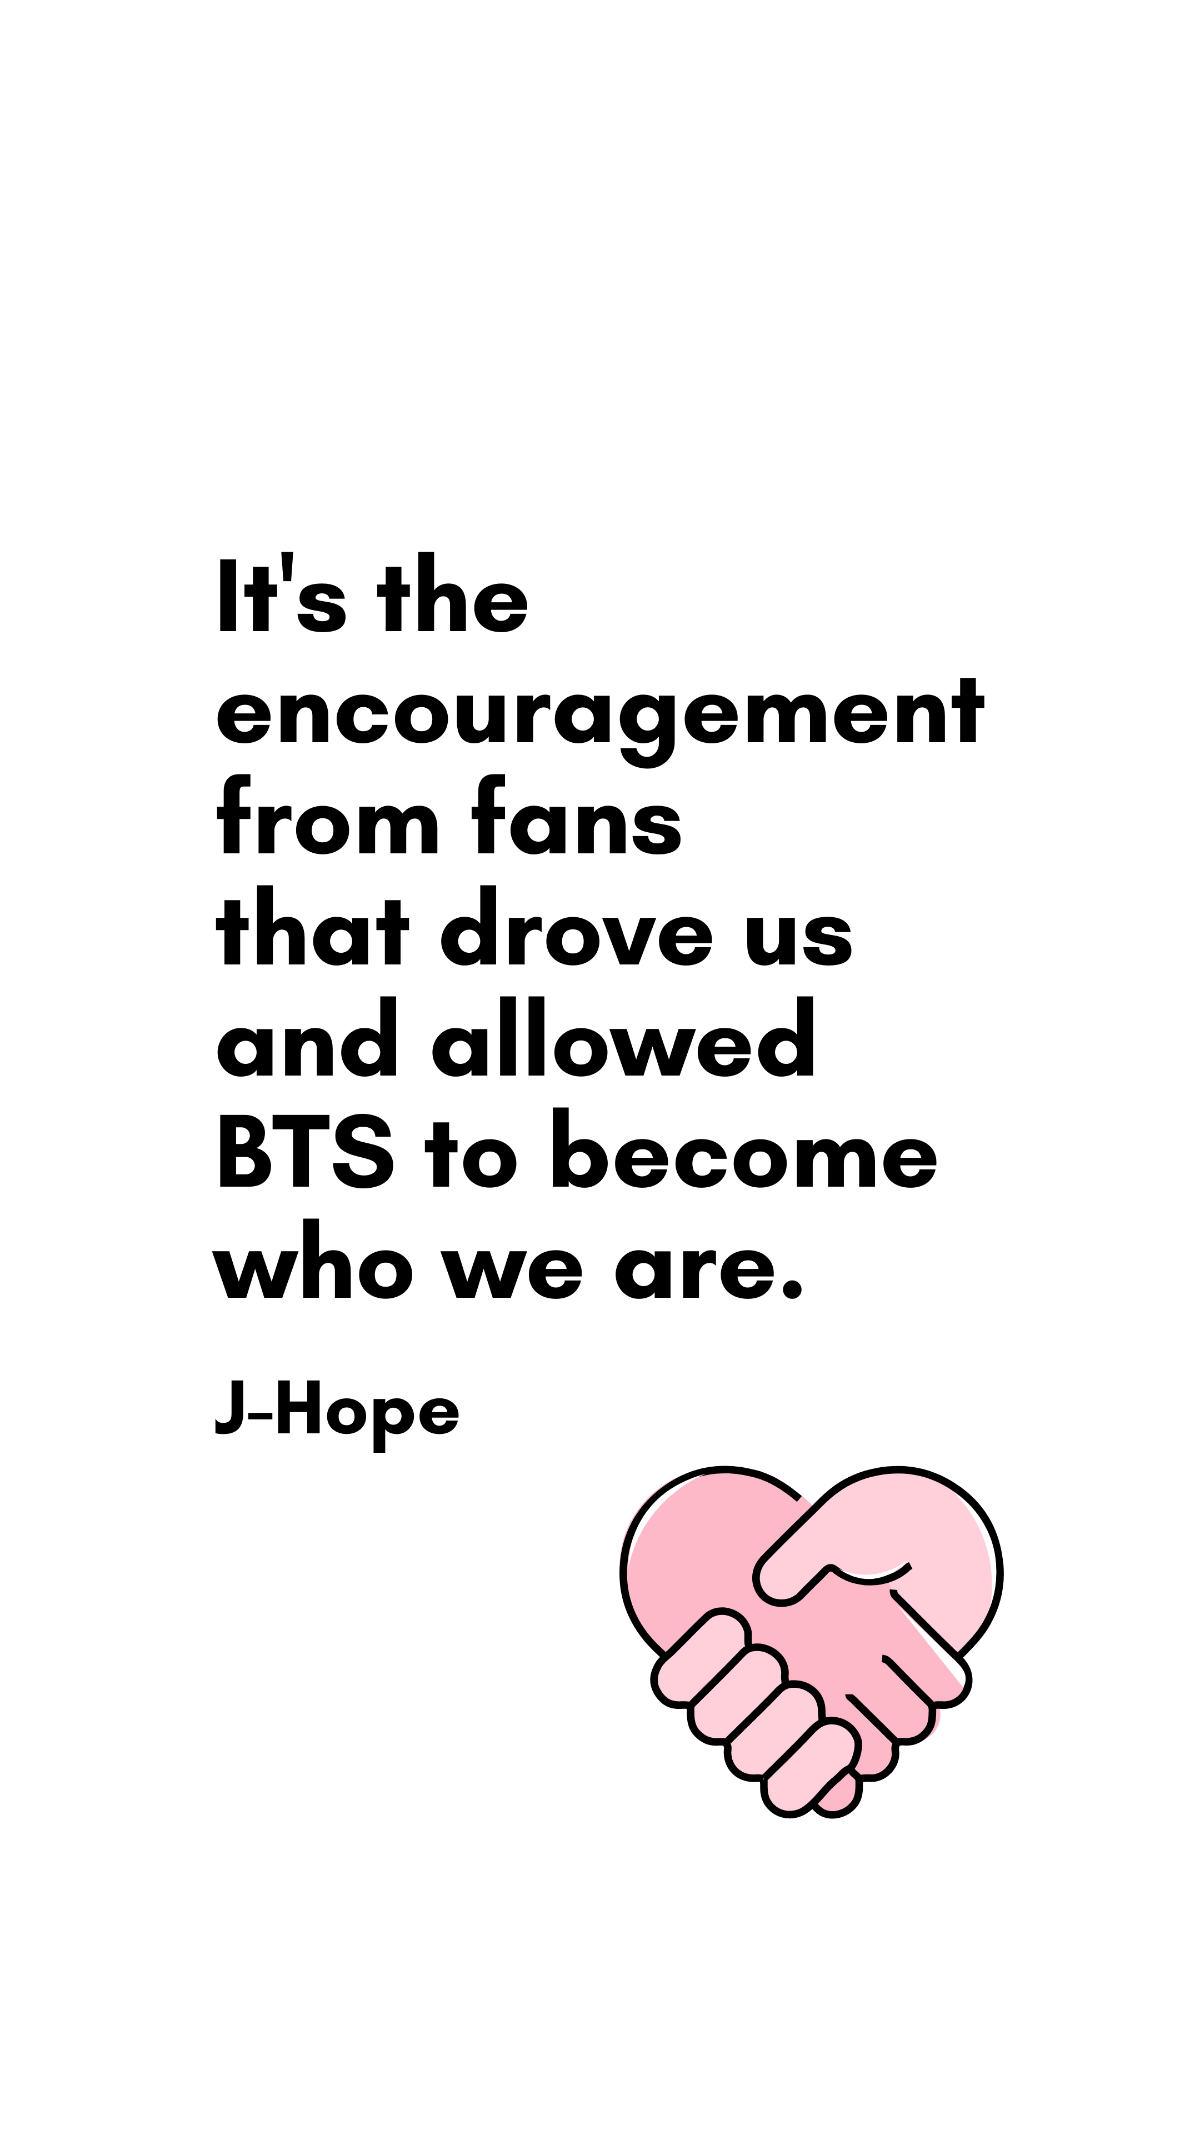 Free J-Hope - It's the encouragement from fans that drove us and allowed BTS to become who we are. Template